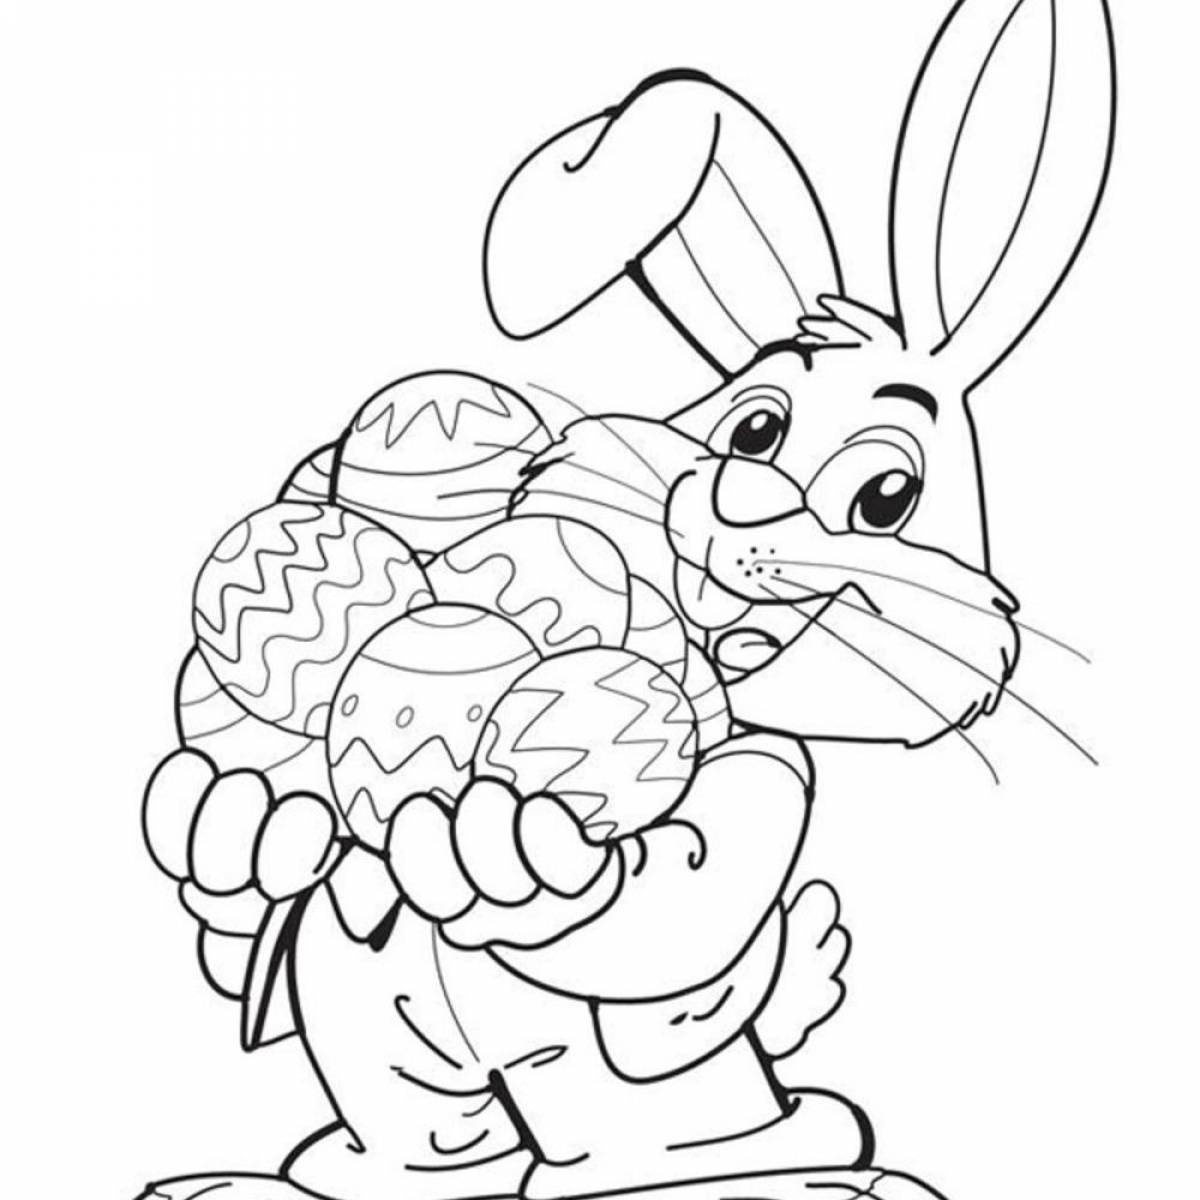 Coloring book fluffy Christmas rabbit